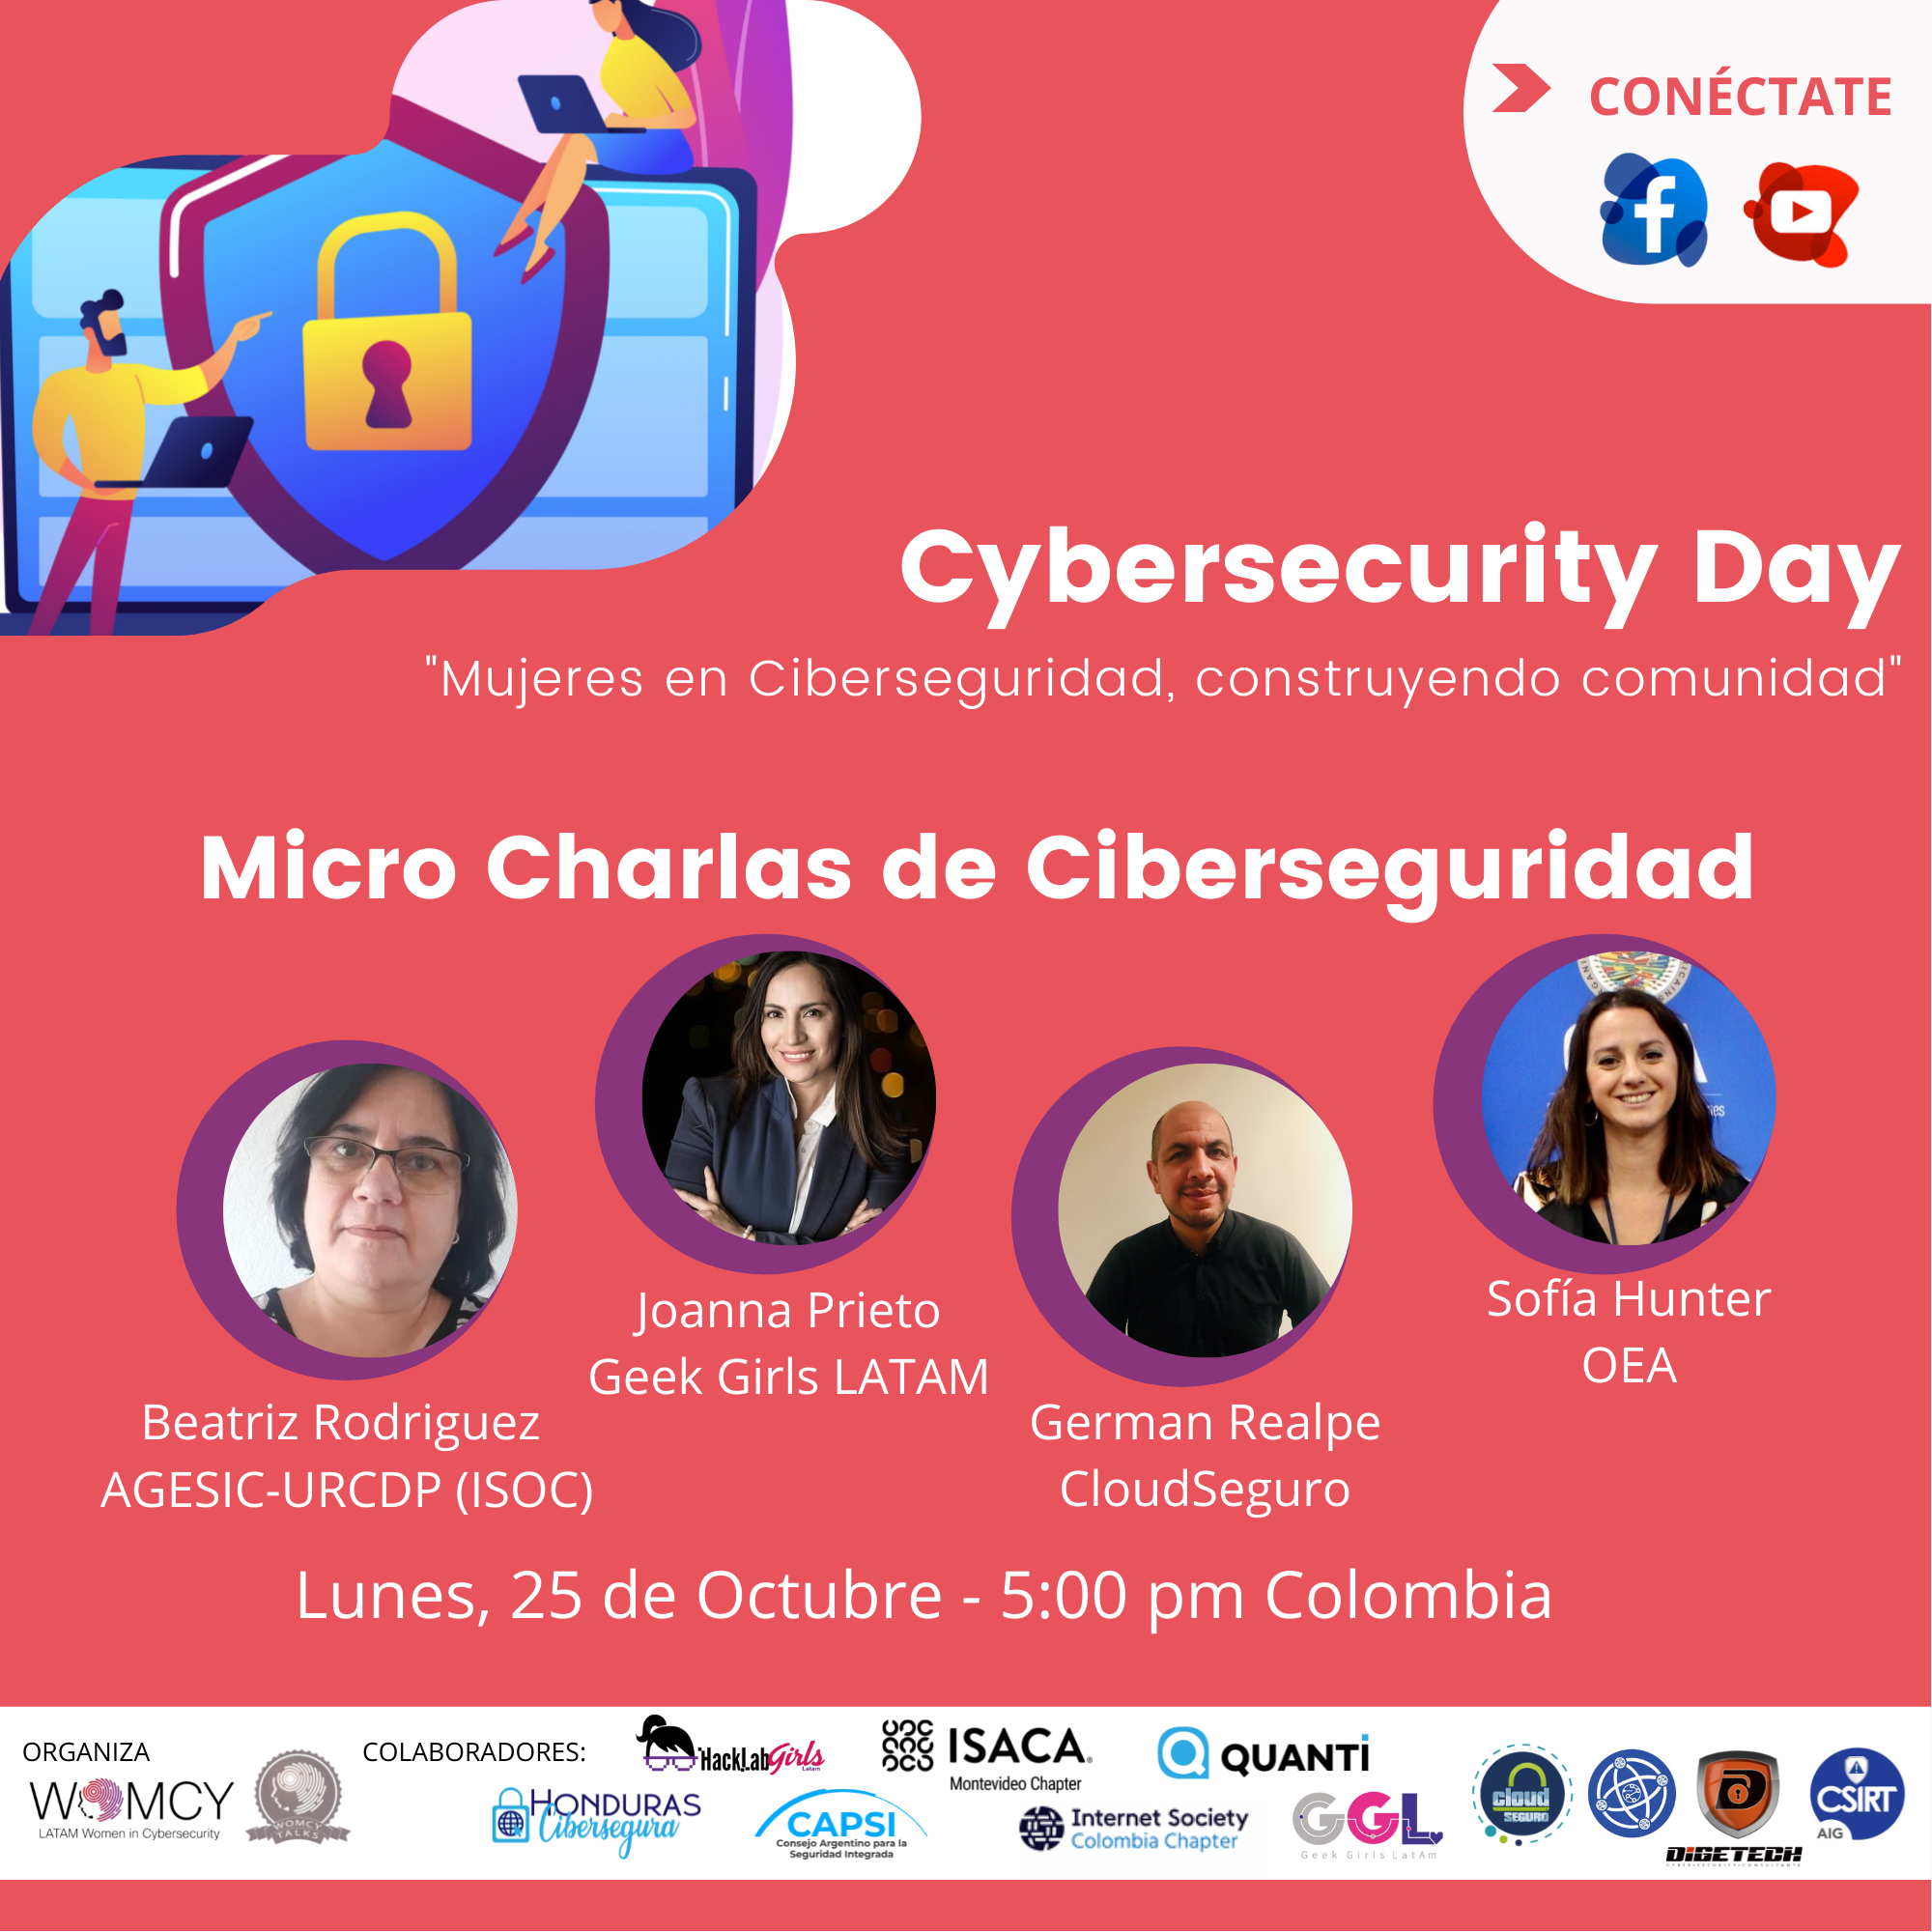 imagen alusiva a Cybersecurity Day